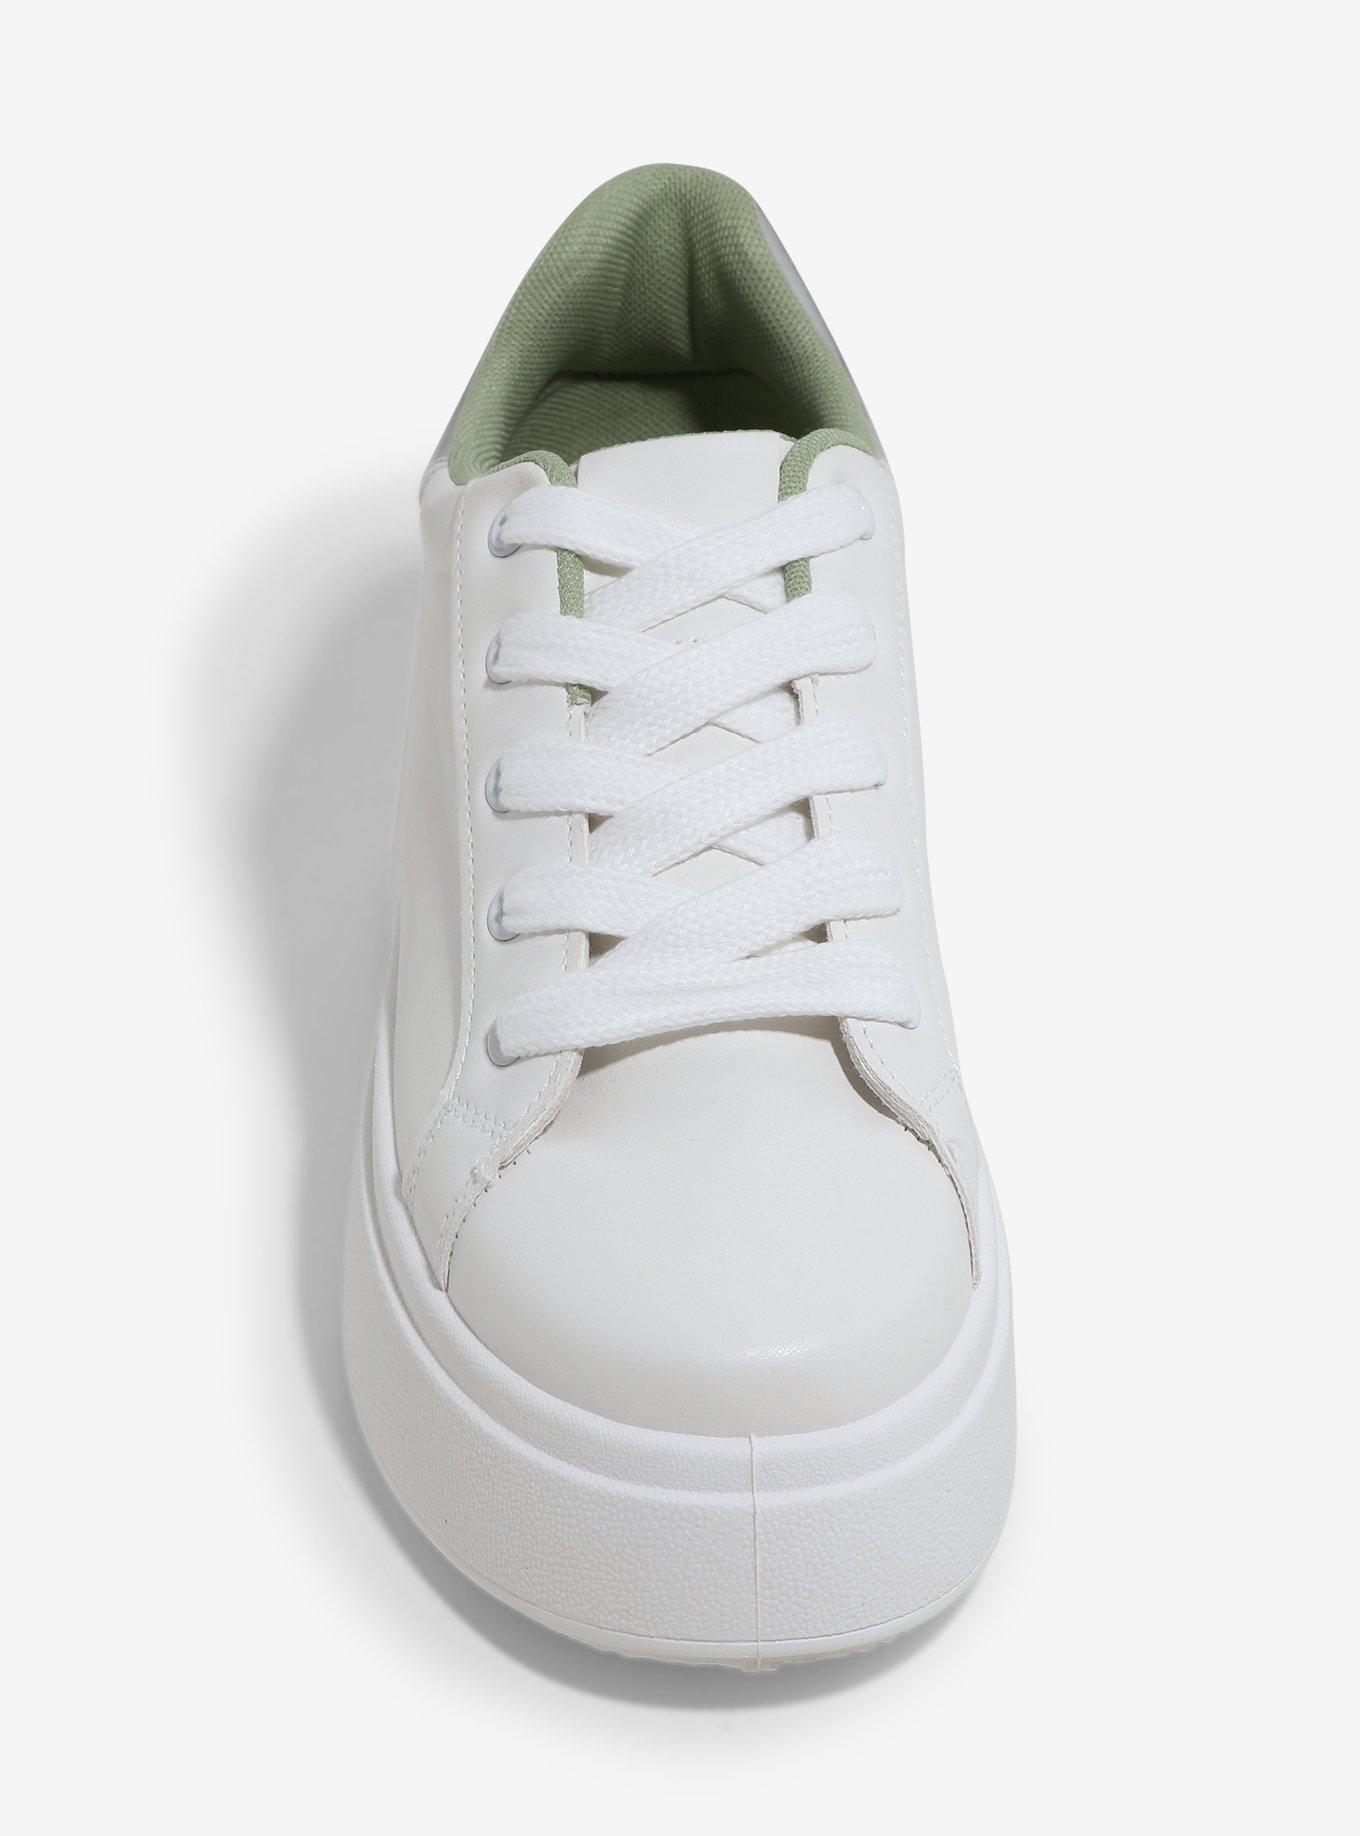 Dirty Laundry White Chunky Sneakers, MULTI, alternate